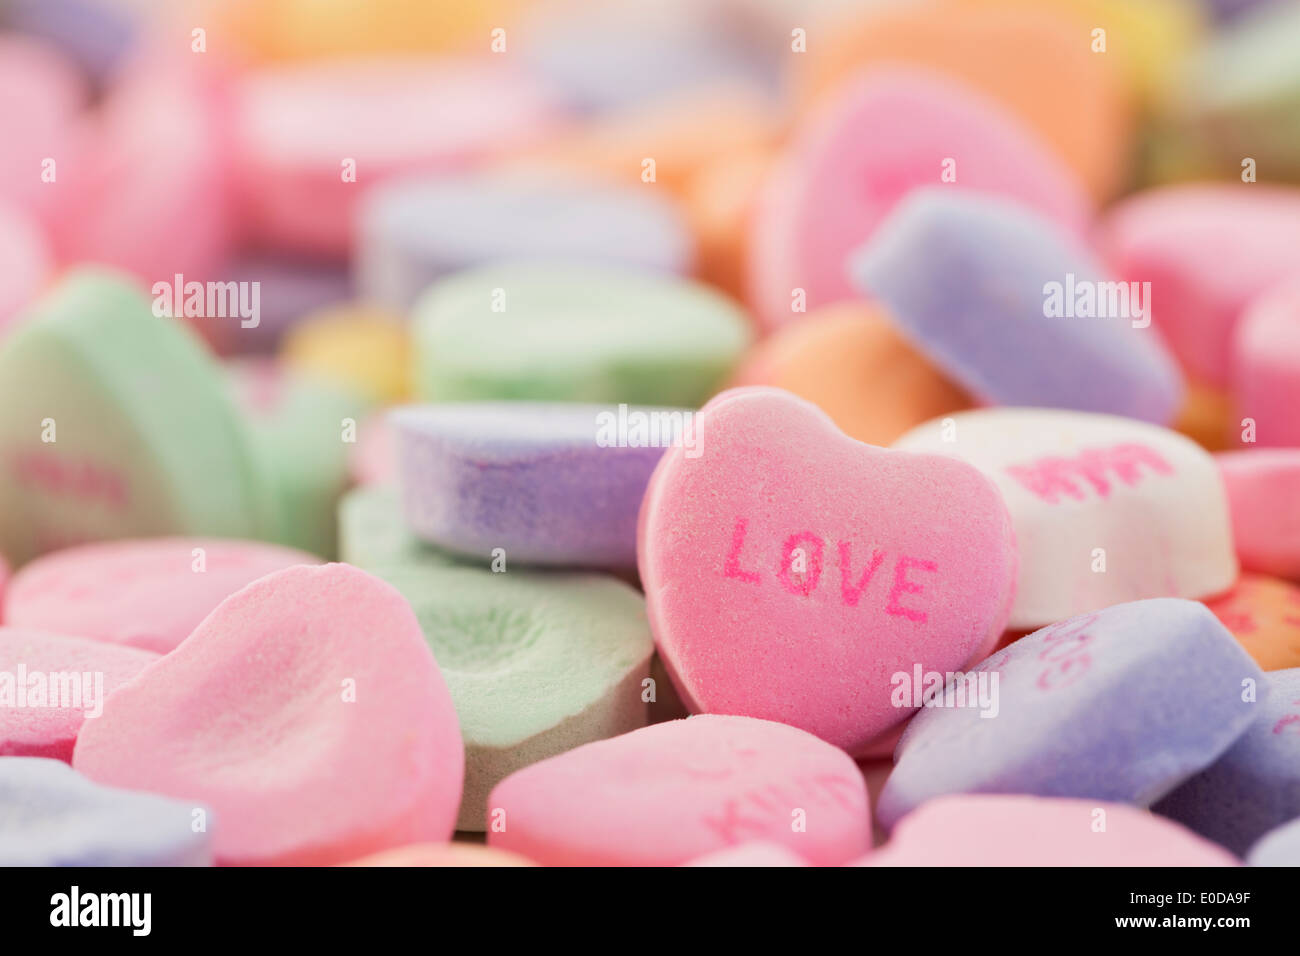 Heart shaped candies Stock Photo